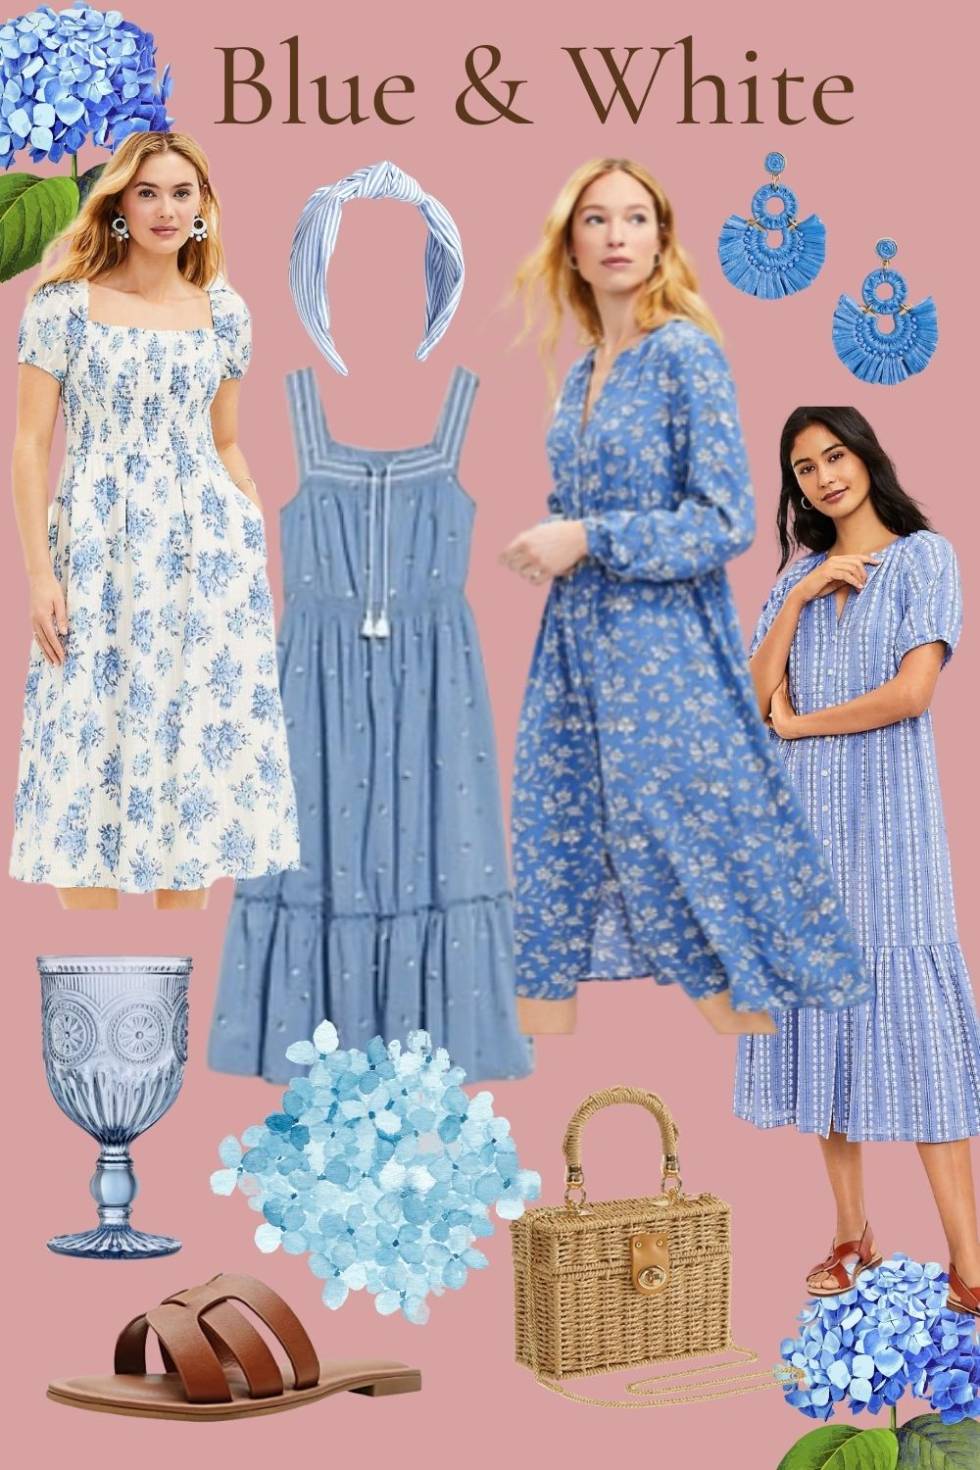 Blue And White Spring Finds | Women’s Fashion for Spring | Affordable Grandmillennial Finds